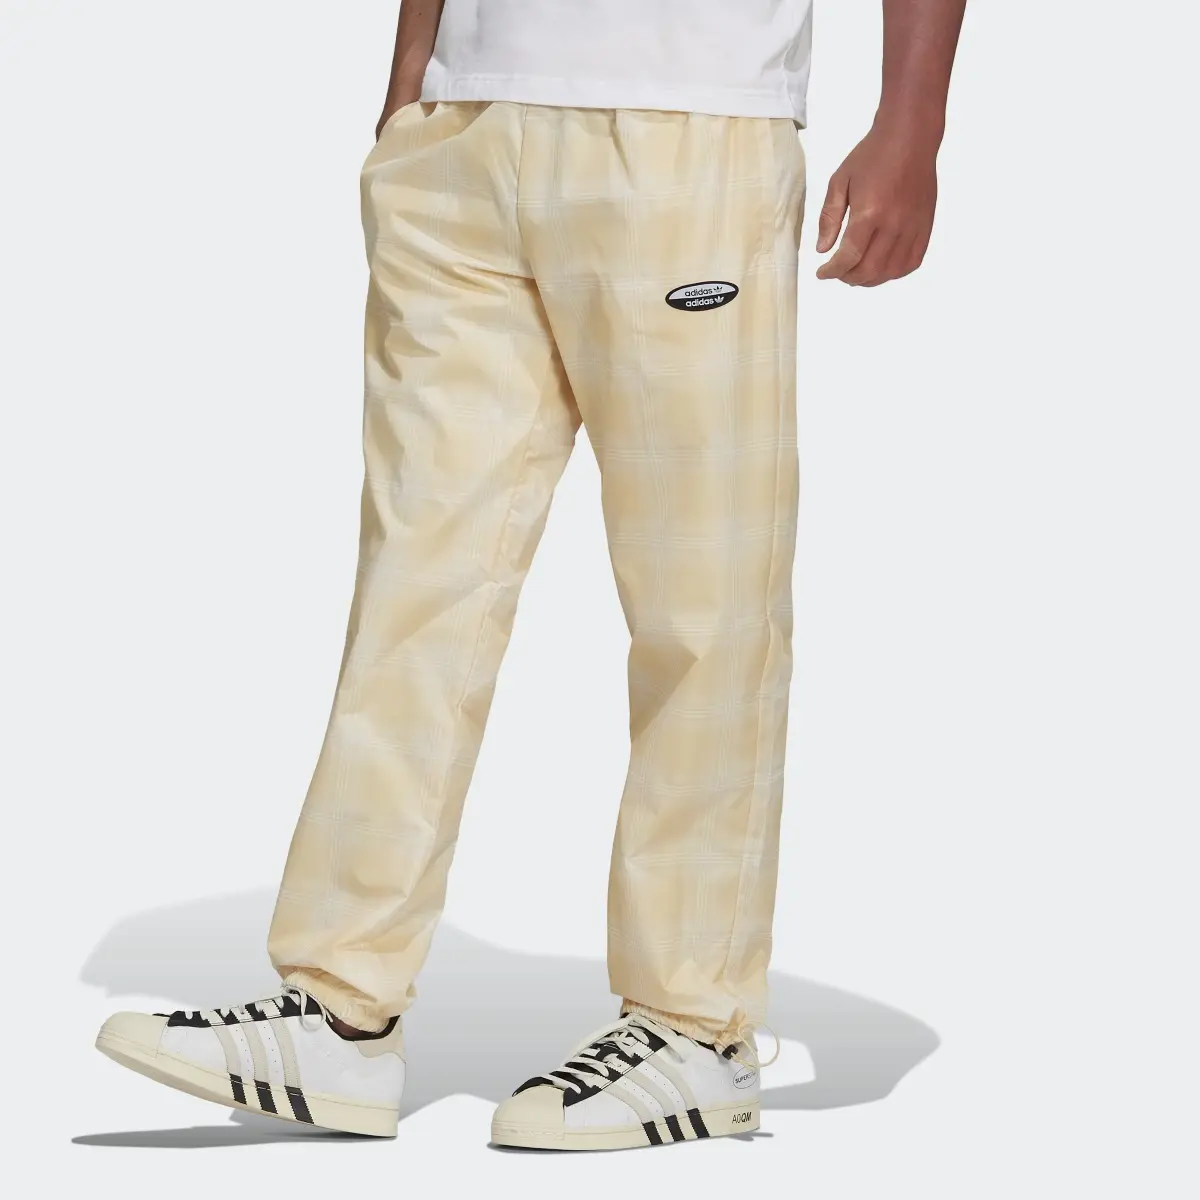 Adidas R.Y.V. Woven Tracksuit Bottoms. 1